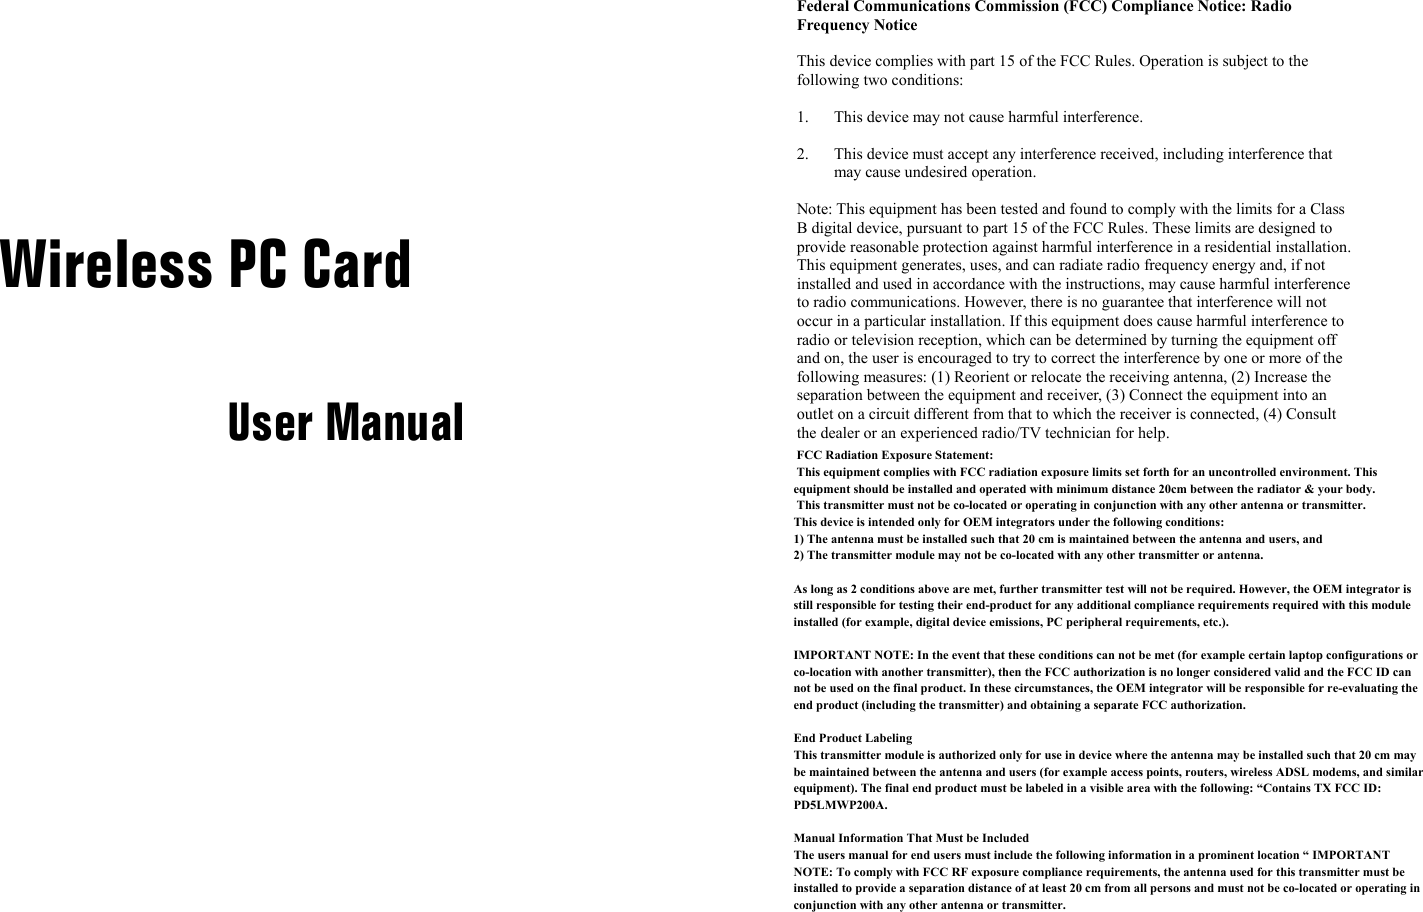      Wireless PC Card  User Manual Federal Communications Commission (FCC) Compliance Notice: Radio Frequency Notice This device complies with part 15 of the FCC Rules. Operation is subject to the following two conditions: 1.  This device may not cause harmful interference. 2.  This device must accept any interference received, including interference that may cause undesired operation. Note: This equipment has been tested and found to comply with the limits for a Class B digital device, pursuant to part 15 of the FCC Rules. These limits are designed to provide reasonable protection against harmful interference in a residential installation. This equipment generates, uses, and can radiate radio frequency energy and, if not installed and used in accordance with the instructions, may cause harmful interference to radio communications. However, there is no guarantee that interference will not occur in a particular installation. If this equipment does cause harmful interference to radio or television reception, which can be determined by turning the equipment off and on, the user is encouraged to try to correct the interference by one or more of the following measures: (1) Reorient or relocate the receiving antenna, (2) Increase the separation between the equipment and receiver, (3) Connect the equipment into an outlet on a circuit different from that to which the receiver is connected, (4) Consult the dealer or an experienced radio/TV technician for help.      FCC Radiation Exposure Statement: This equipment complies with FCC radiation exposure limits set forth for an uncontrolled environment. This equipment should be installed and operated with minimum distance 20cm between the radiator &amp; your body. This transmitter must not be co-located or operating in conjunction with any other antenna or transmitter.This device is intended only for OEM integrators under the following conditions:1) The antenna must be installed such that 20 cm is maintained between the antenna and users, and 2) The transmitter module may not be co-located with any other transmitter or antenna.As long as 2 conditions above are met, further transmitter test will not be required. However, the OEM integrator is still responsible for testing their end-product for any additional compliance requirements required with this module installed (for example, digital device emissions, PC peripheral requirements, etc.).IMPORTANT NOTE: In the event that these conditions can not be met (for example certain laptop configurations or co-location with another transmitter), then the FCC authorization is no longer considered valid and the FCC ID can not be used on the final product. In these circumstances, the OEM integrator will be responsible for re-evaluating the end product (including the transmitter) and obtaining a separate FCC authorization.End Product LabelingThis transmitter module is authorized only for use in device where the antenna may be installed such that 20 cm may be maintained between the antenna and users (for example access points, routers, wireless ADSL modems, and similar equipment). The final end product must be labeled in a visible area with the following: “Contains TX FCC ID: PD5LMWP200A.Manual Information That Must be IncludedThe users manual for end users must include the following information in a prominent location “ IMPORTANT NOTE: To comply with FCC RF exposure compliance requirements, the antenna used for this transmitter must be installed to provide a separation distance of at least 20 cm from all persons and must not be co-located or operating in conjunction with any other antenna or transmitter.